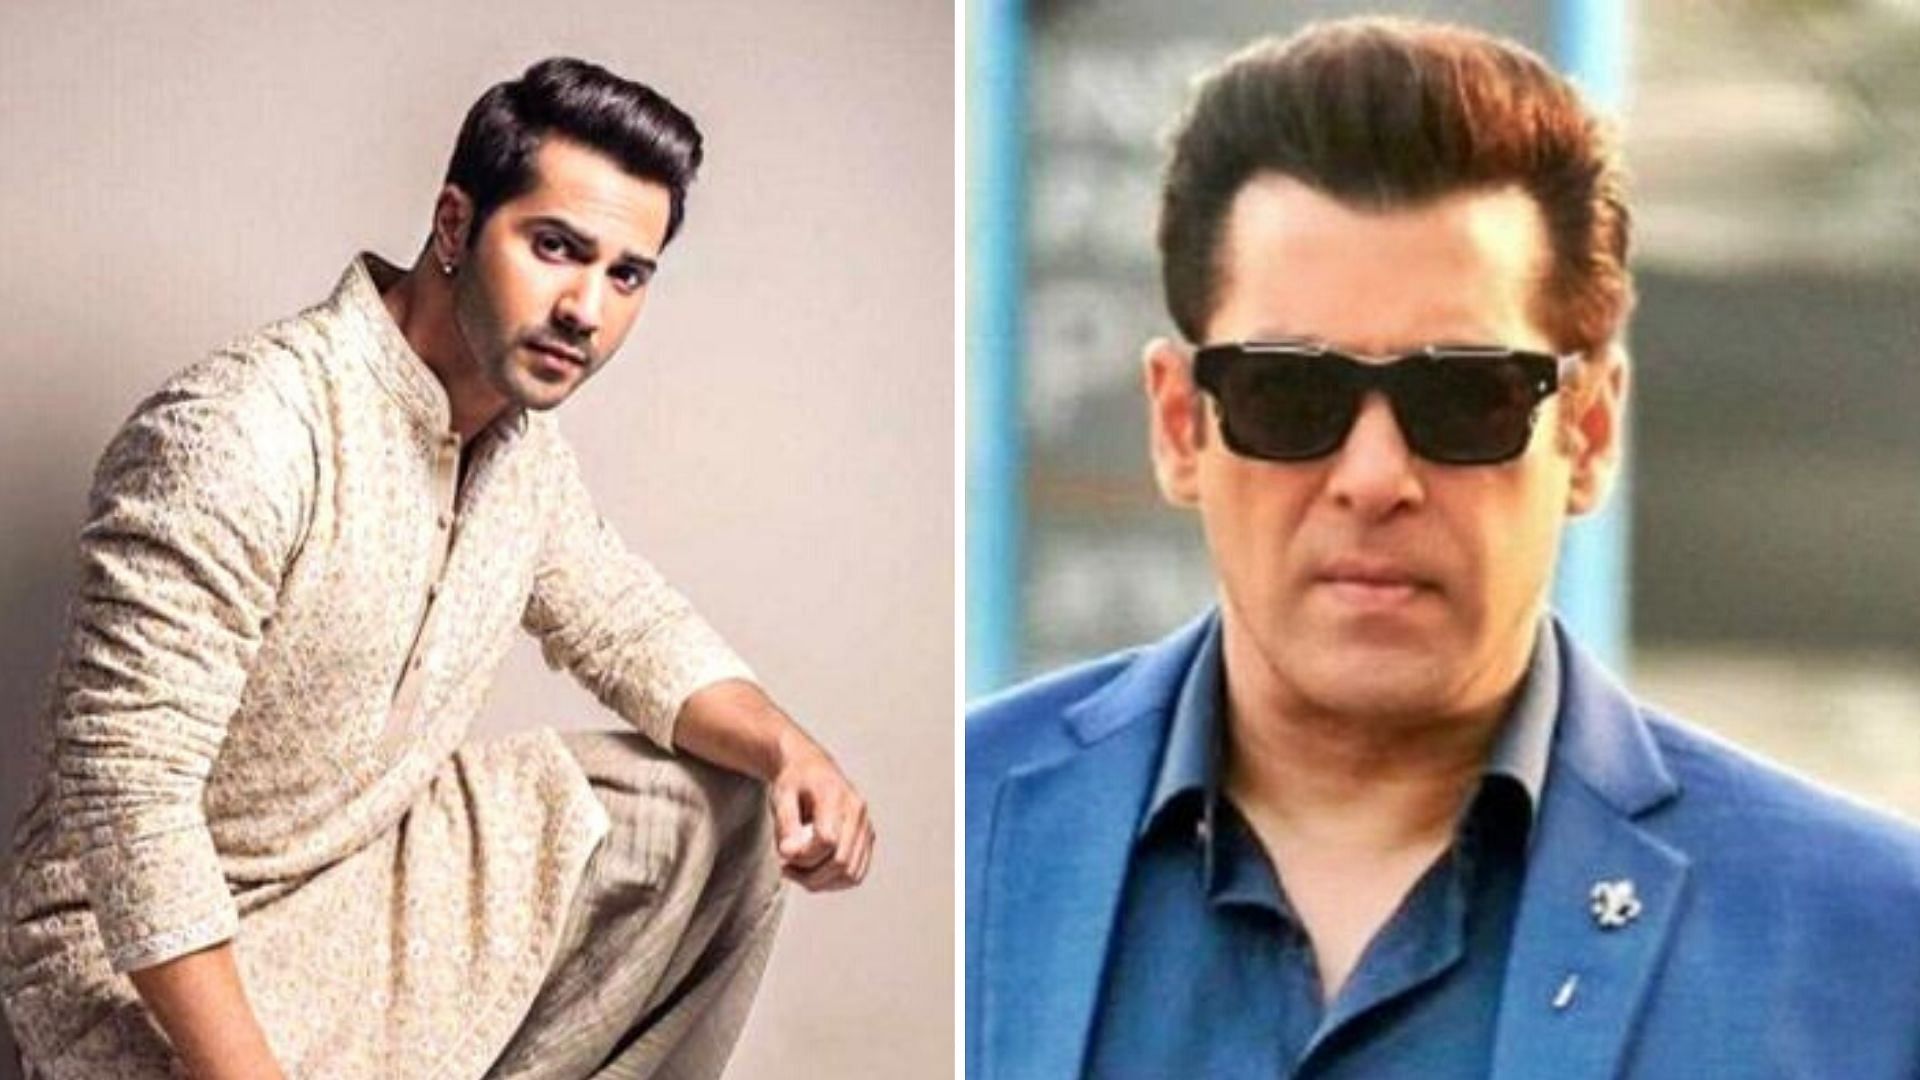 Varun Dhawan and Salman Khan express outrage over the murder of the veterinarian on social media.